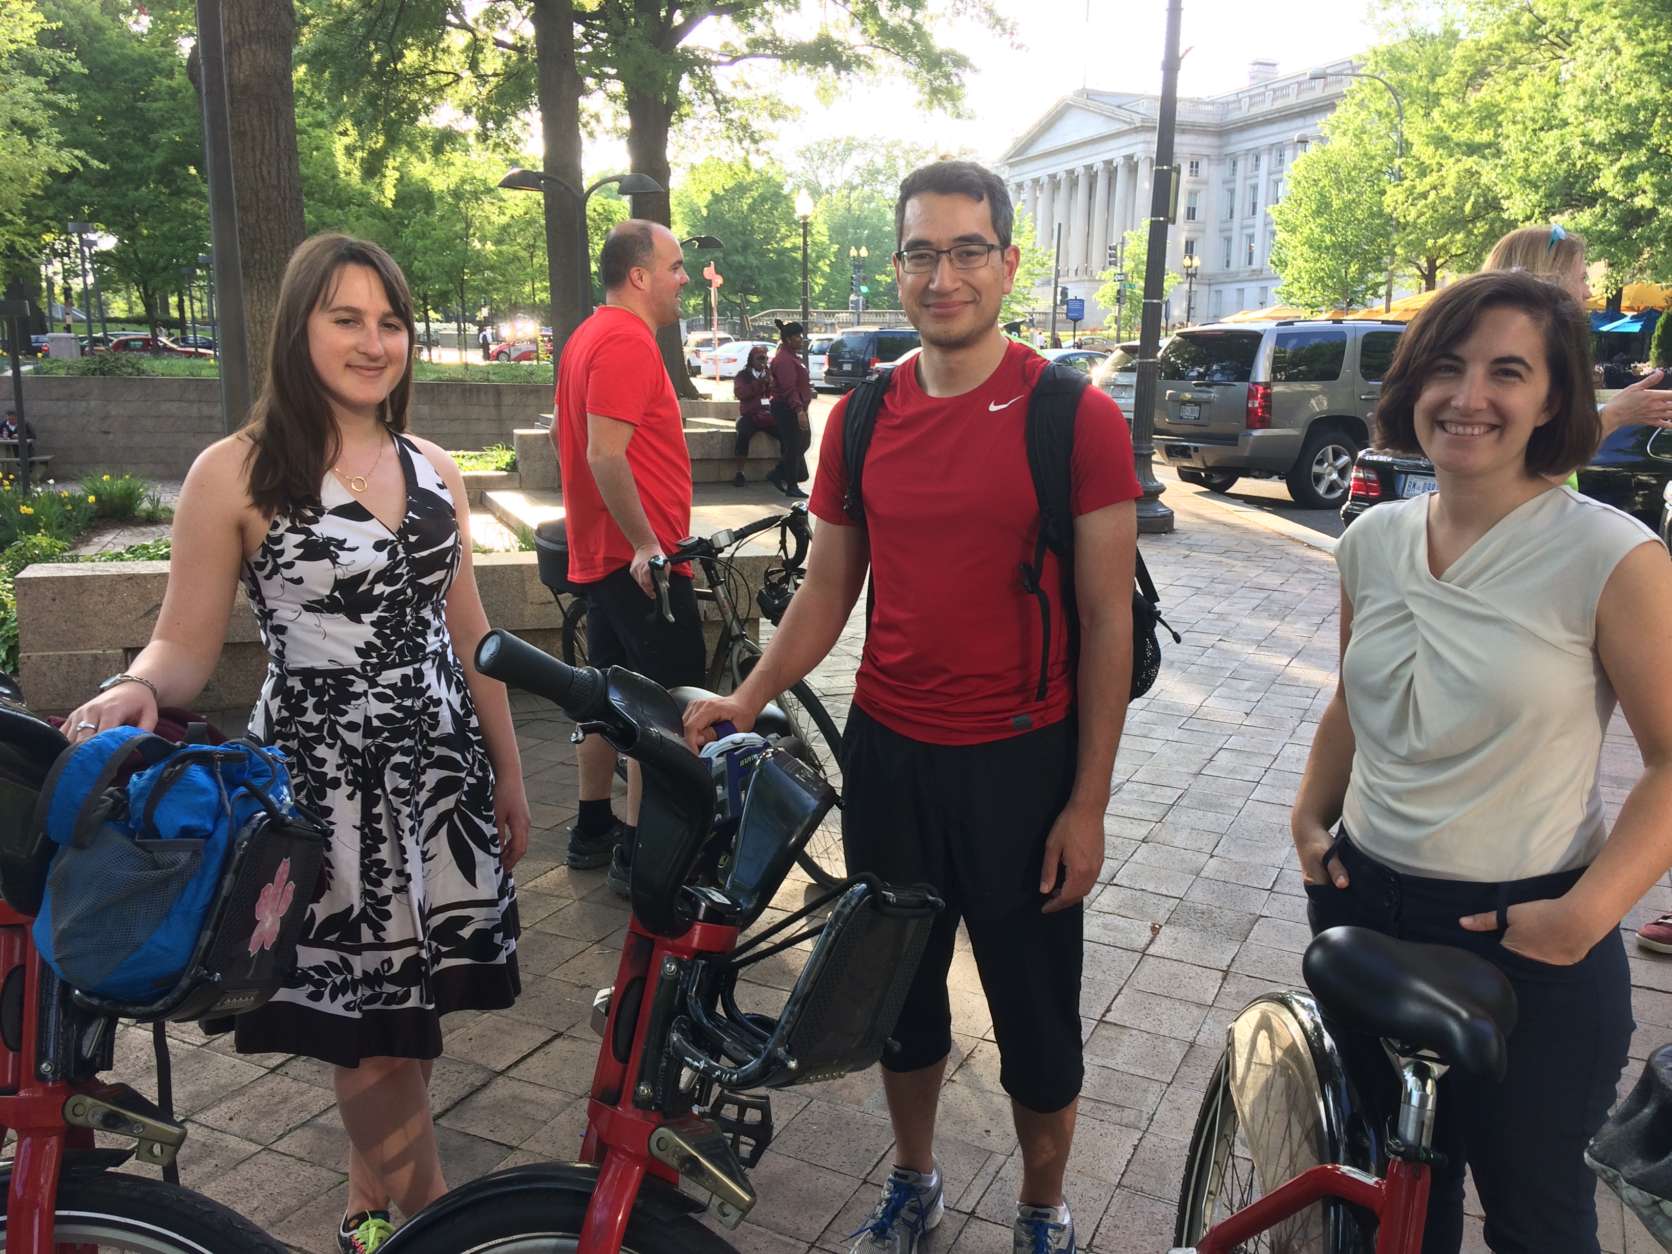 From left, Meghan McAvoy, Karl Schackmann and Ana Karimi join a community ride organized by the Washington Area Bicyclist Association on Wednesday, April 26, 2017. The ride started at Pershing Park in D.C. and took riders to some bridges that connect D.C. and Virginia. (WTOP/Abigail Constantino)